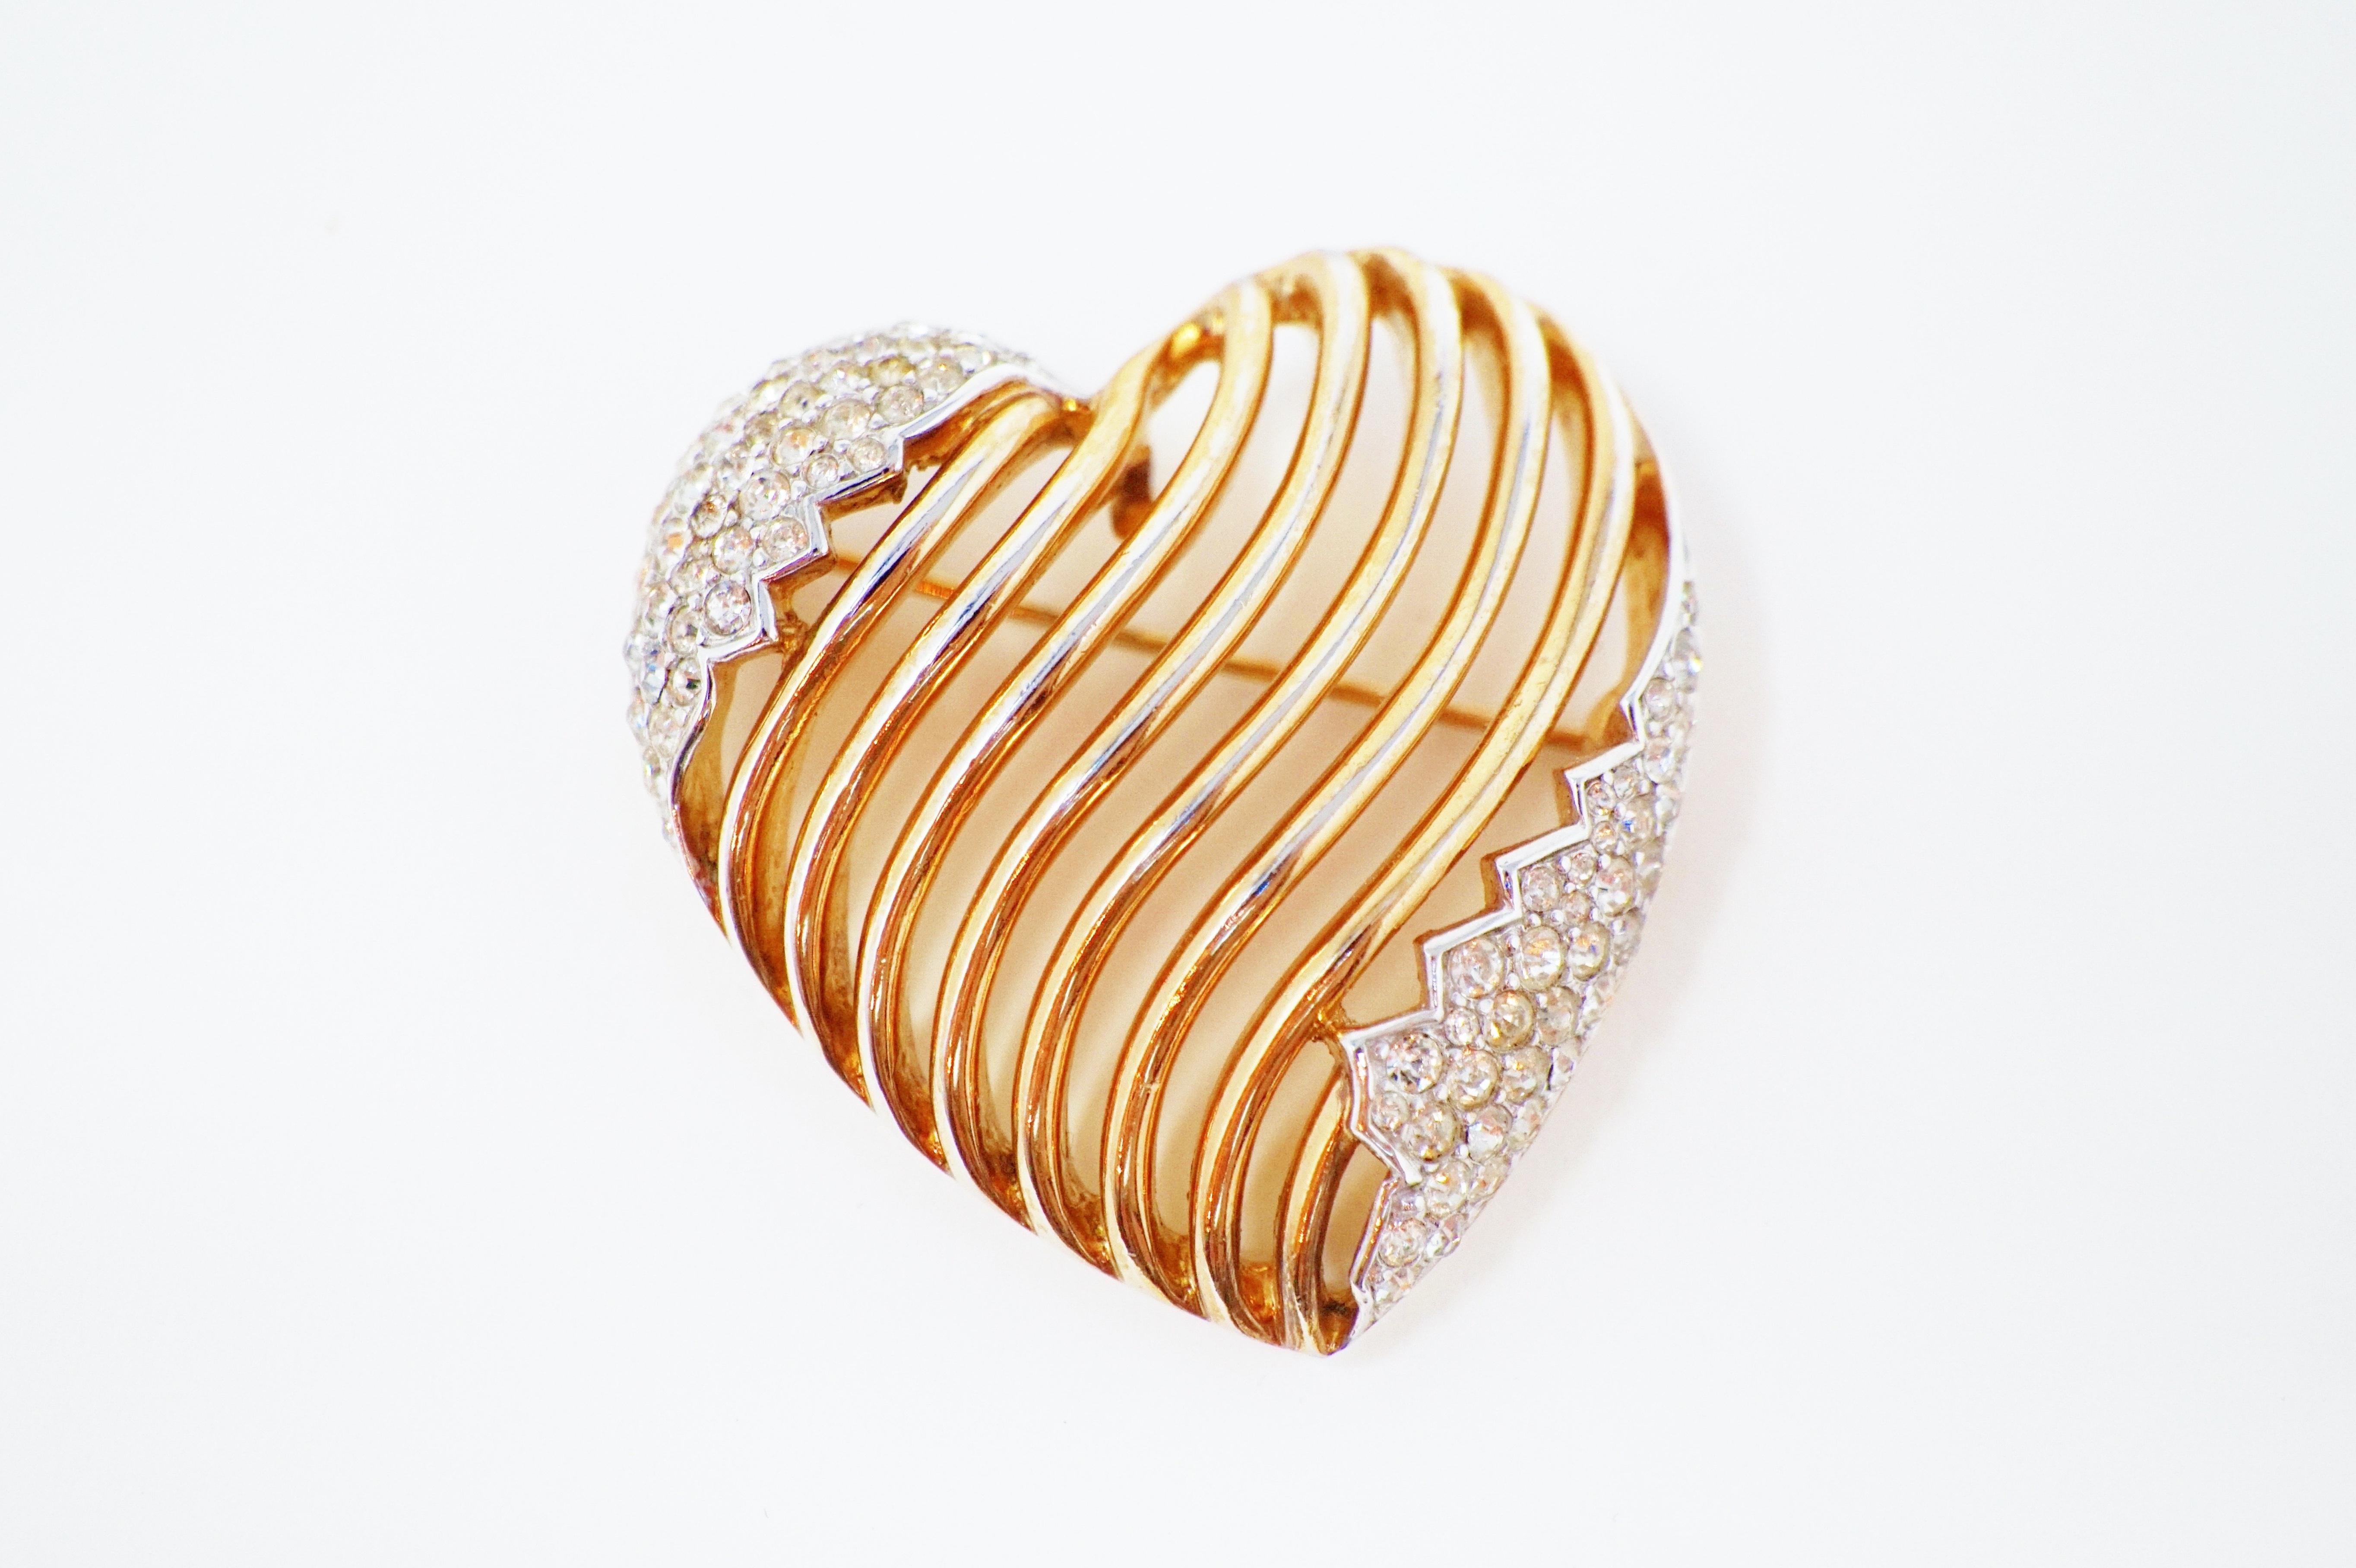 Women's Crown Trifari Gilded Heart Brooch with Swarovski Pavé by Alfred Philippe, 1953